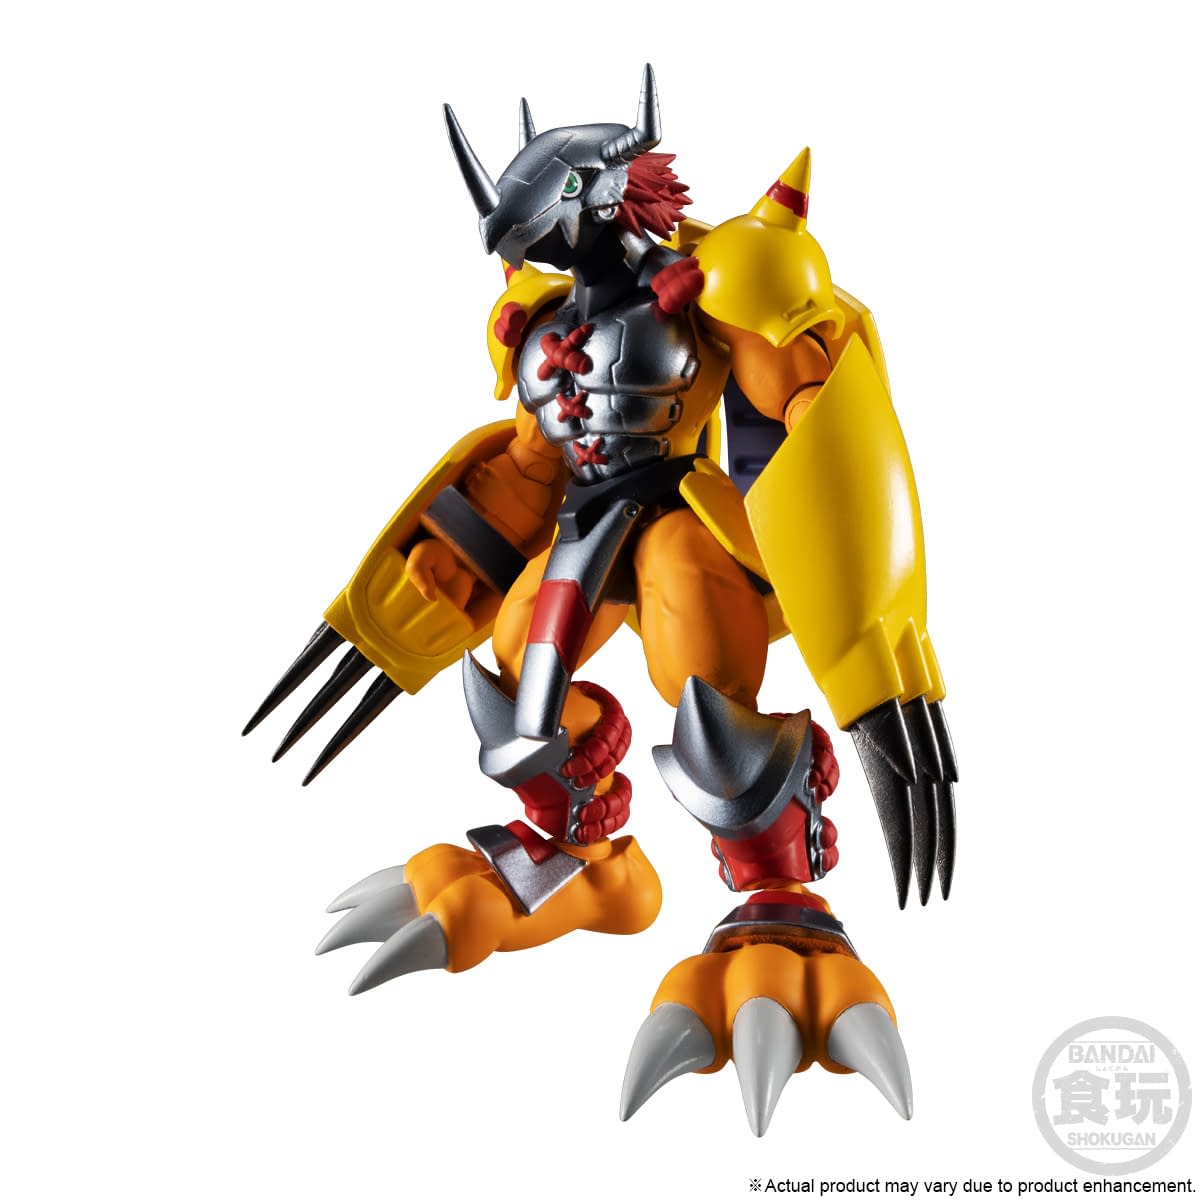 Digimon Digivolutions Get Complete Set of Figures with Bandai